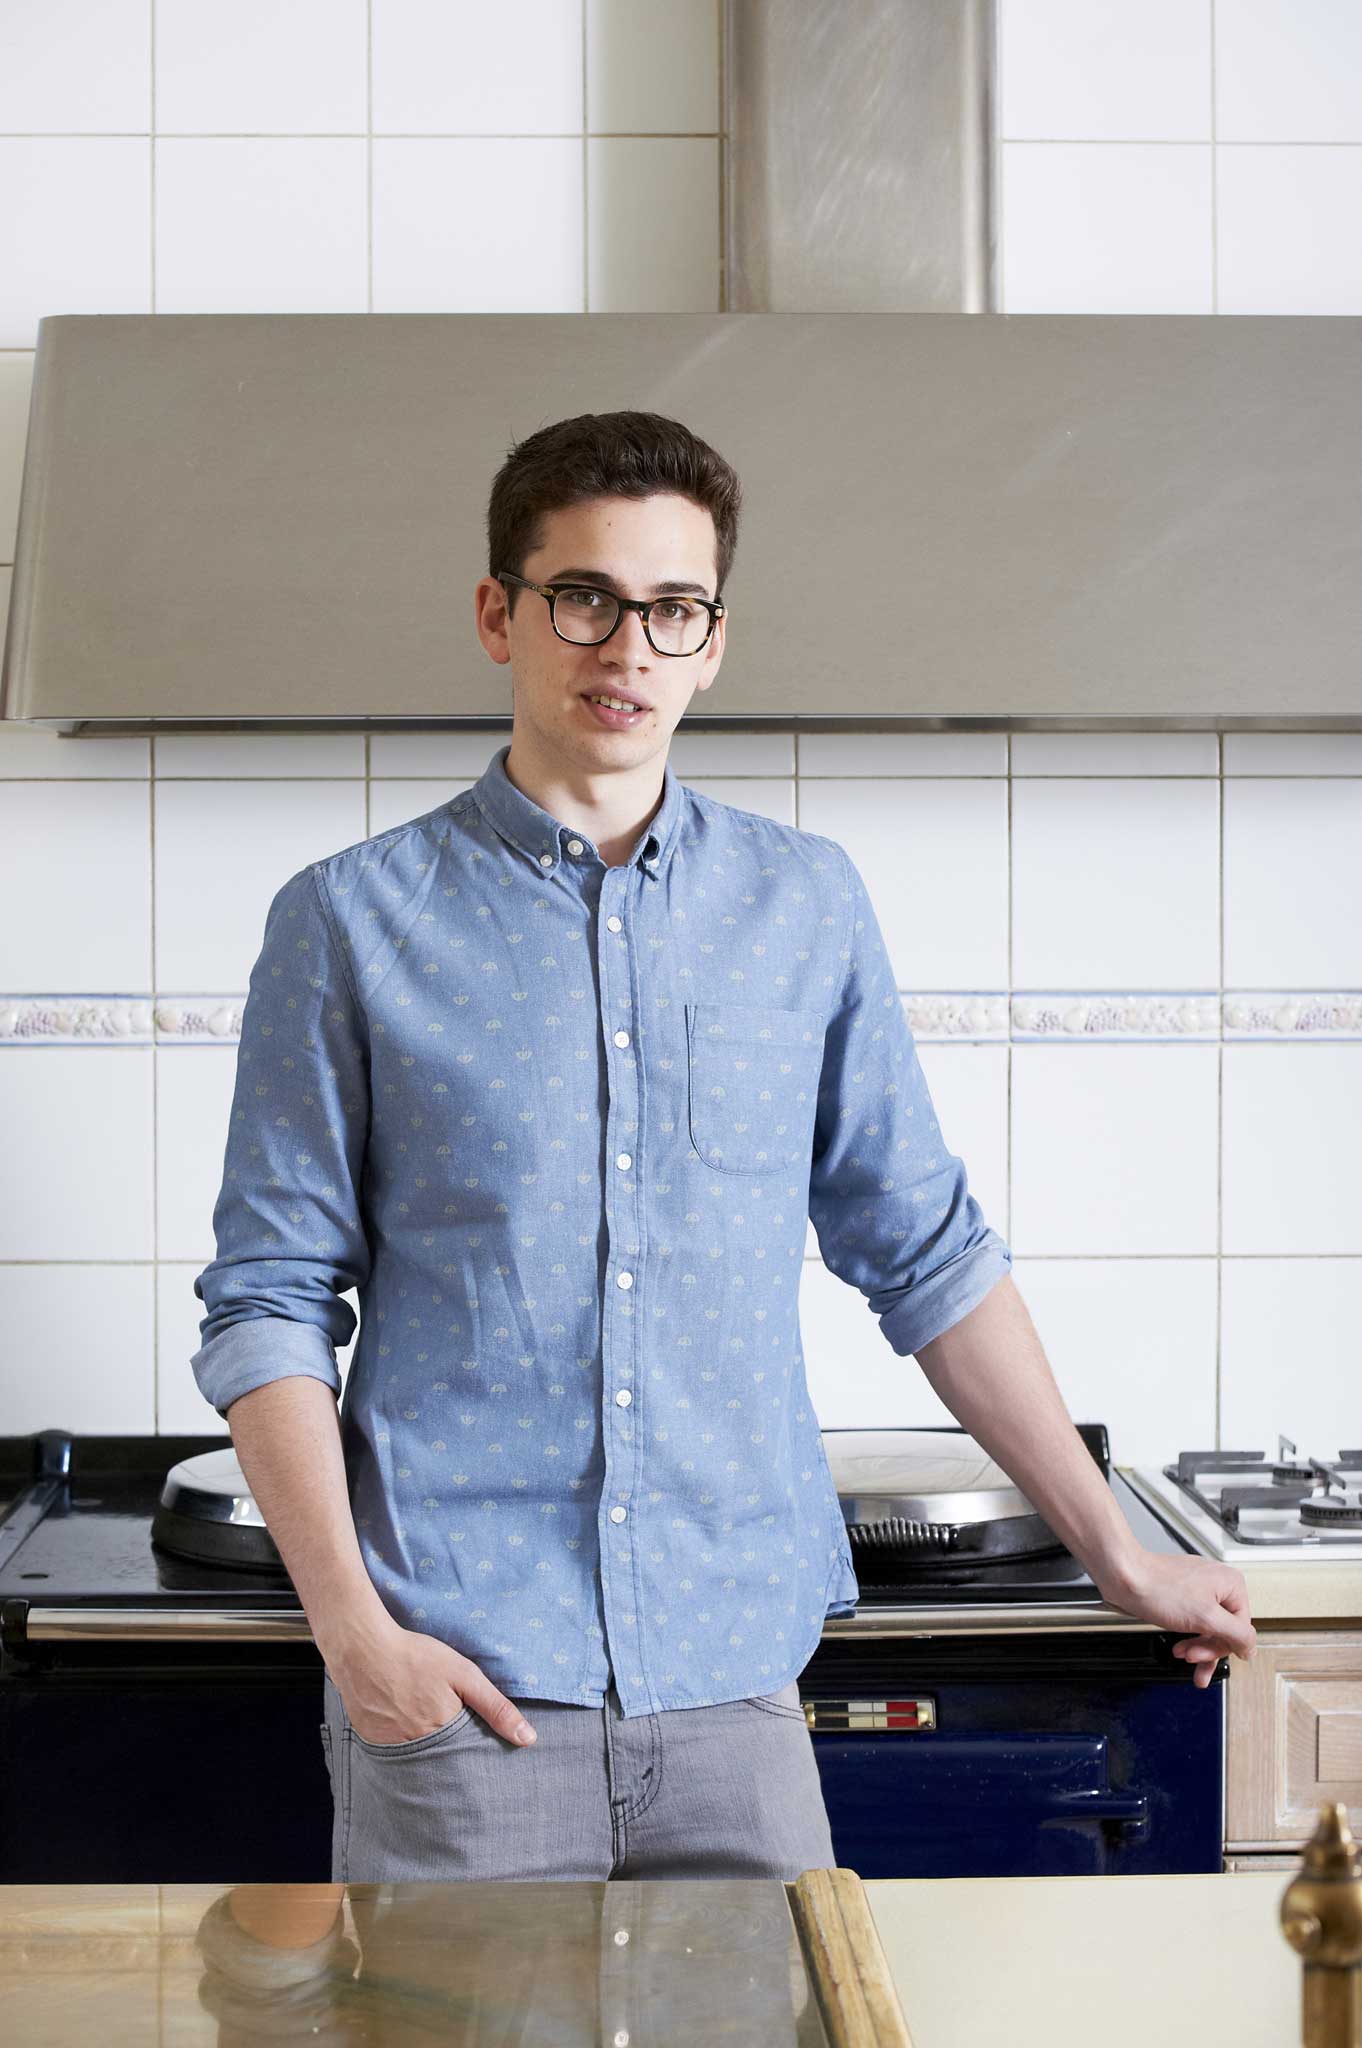 Raw talent: Stern is author of six cookery books, the first which he wrote aged 14